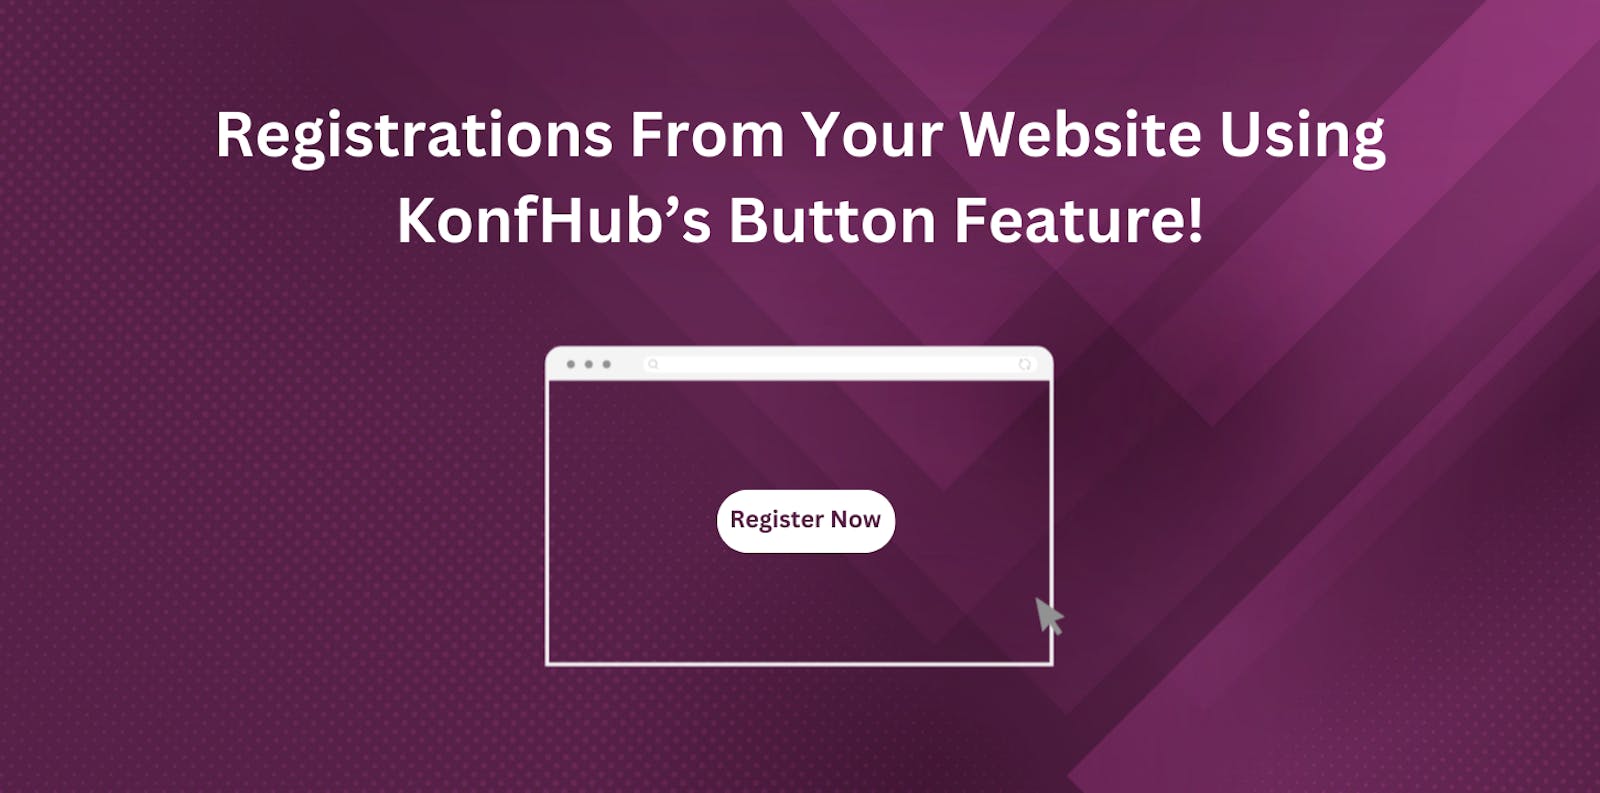 Registrations From Your Website Using KonfHub’s Button Feature!